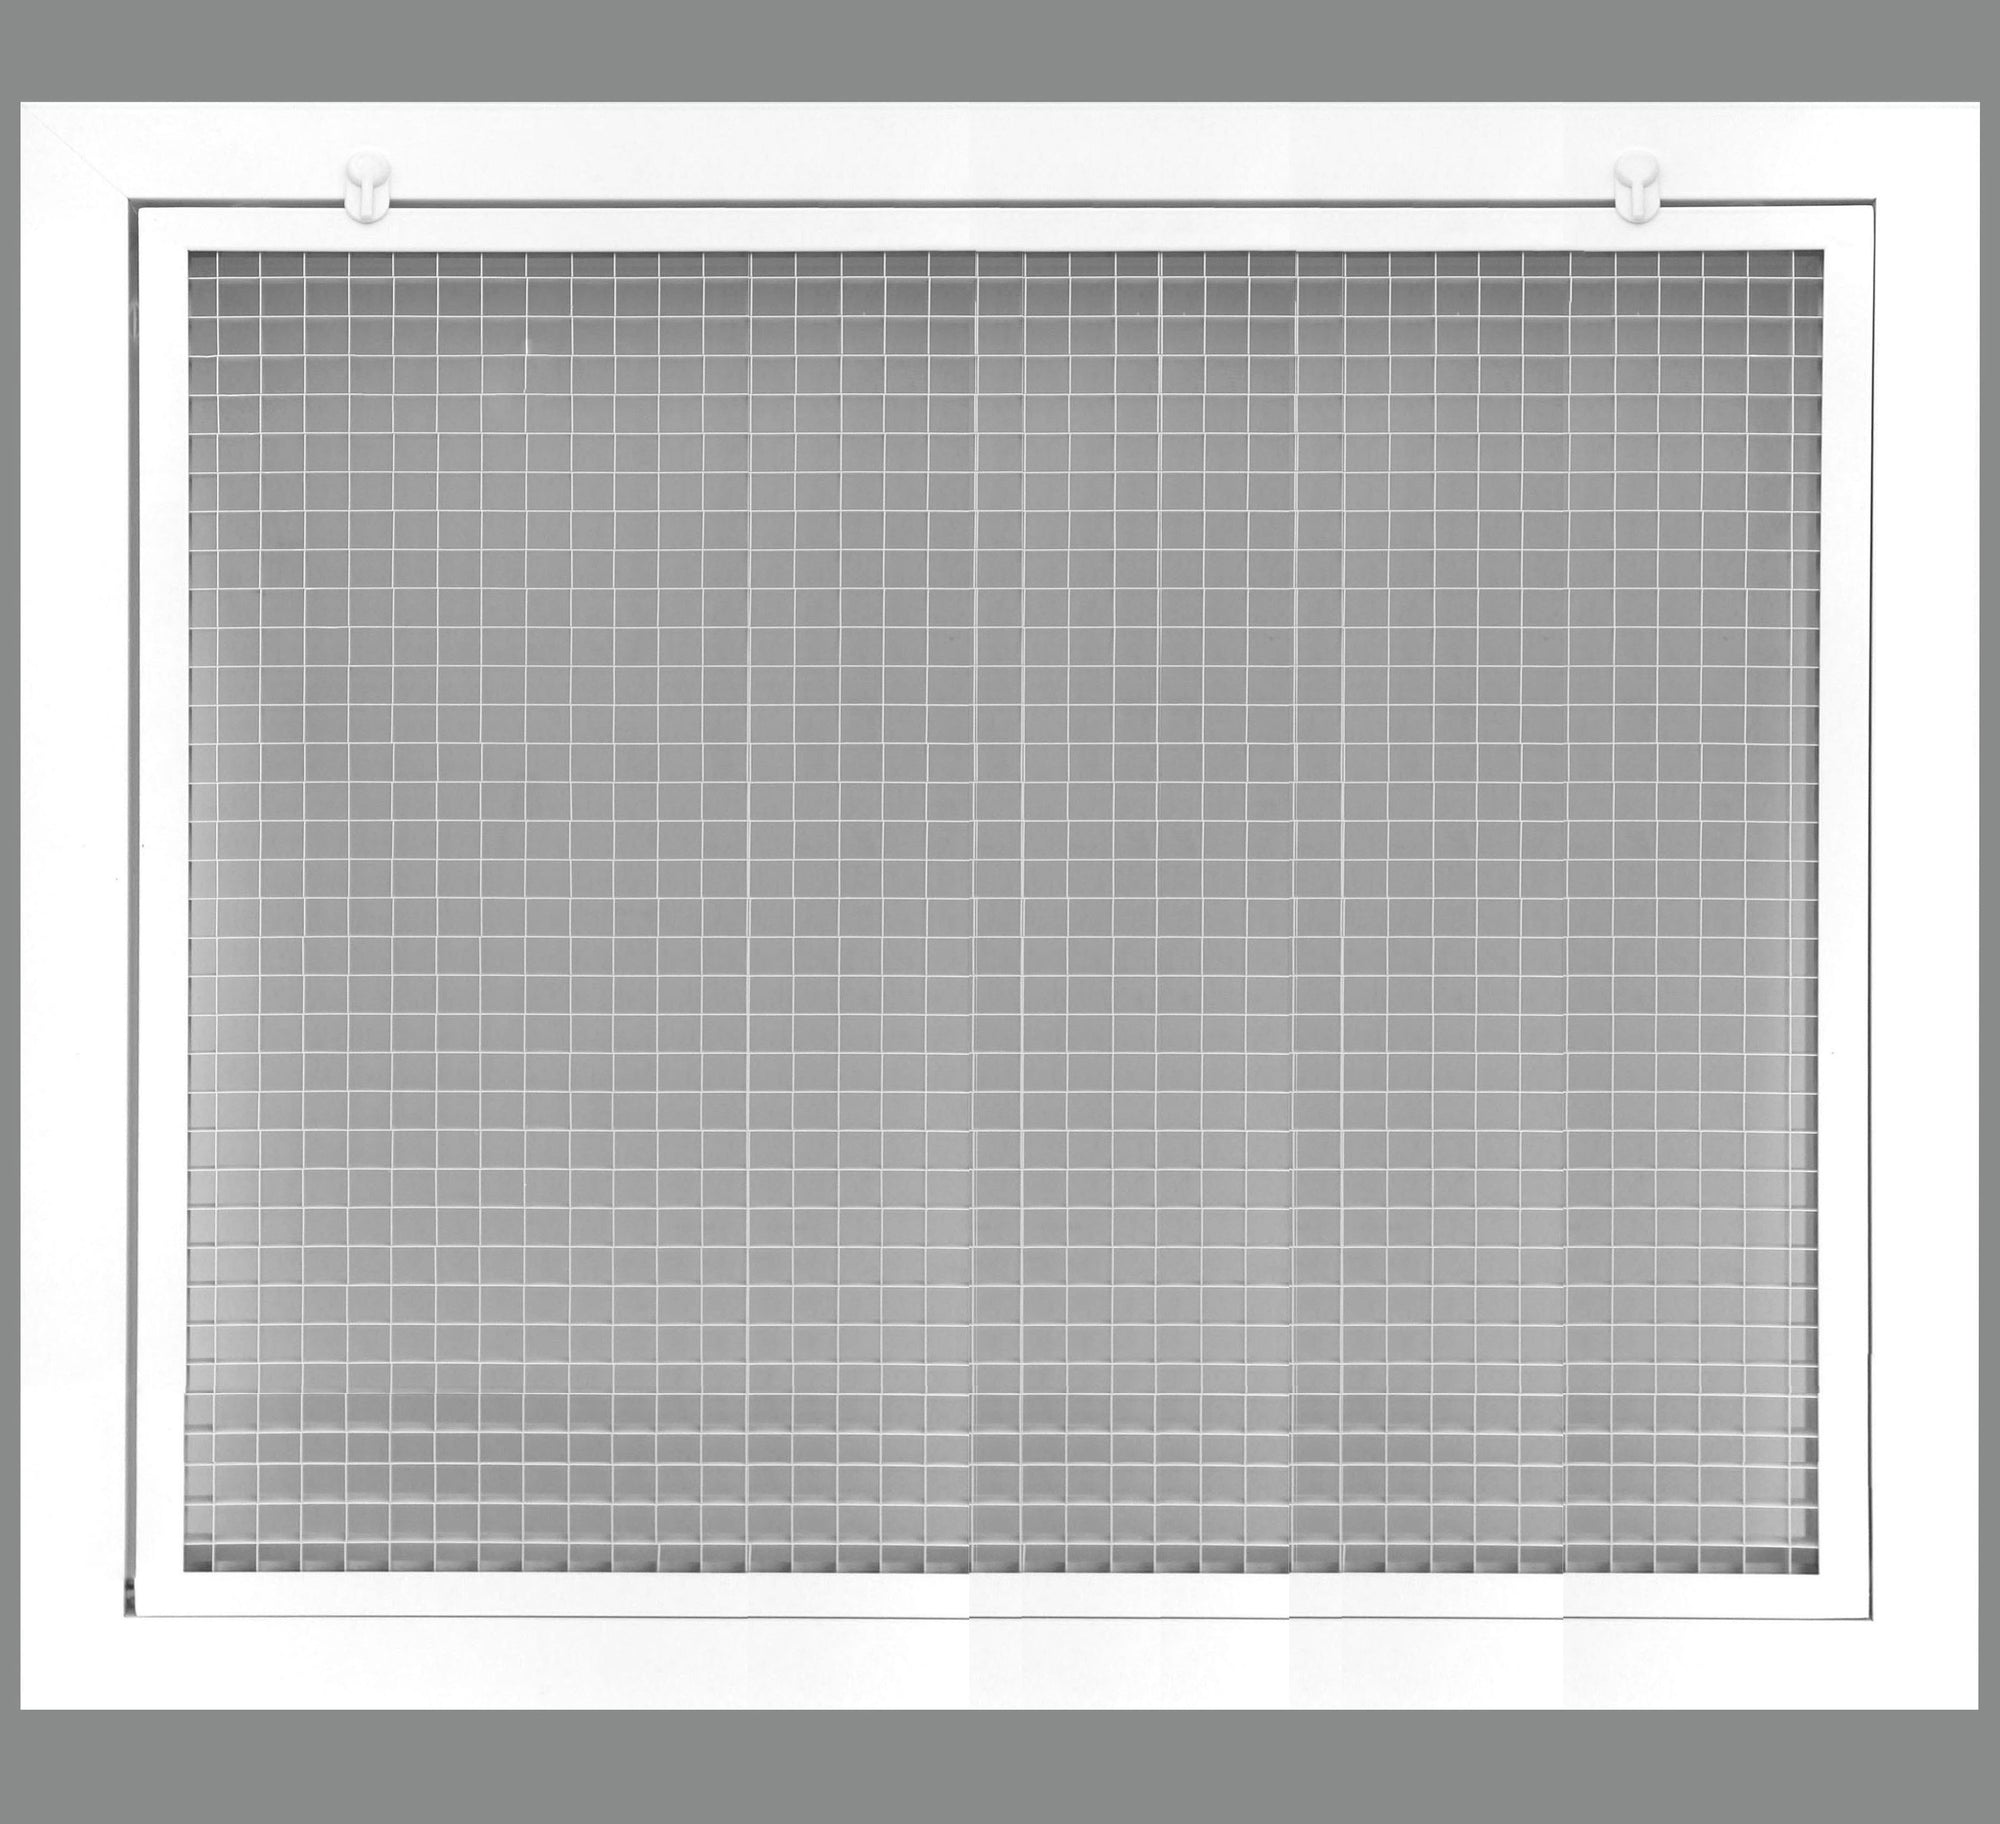 32" x 30" Cube Core Eggcrate Return Air Filter Grille for 1" Filter